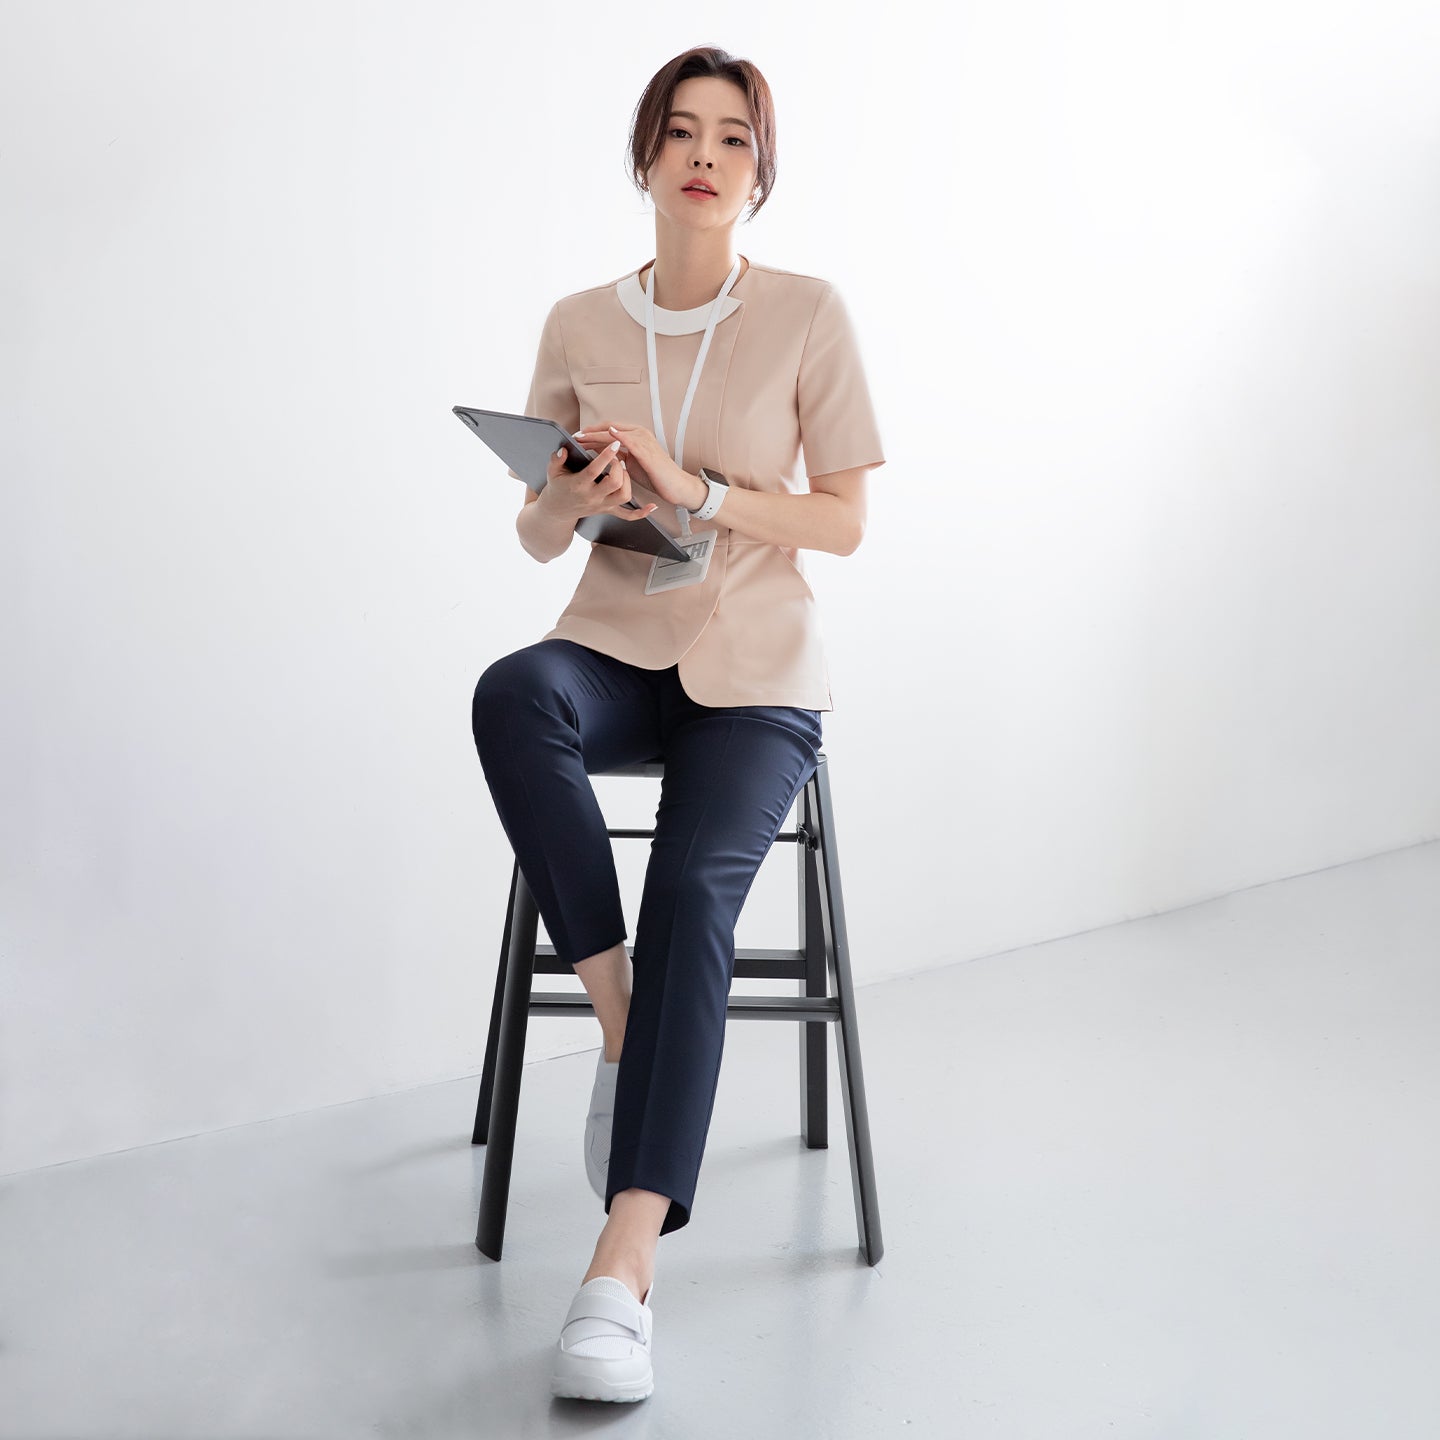 A model sitting on a stool, wearing a beige round-neck top with a front zipper, paired with dark pants and white shoes, holding a tablet and lanyard in a brightly lit room,Beige